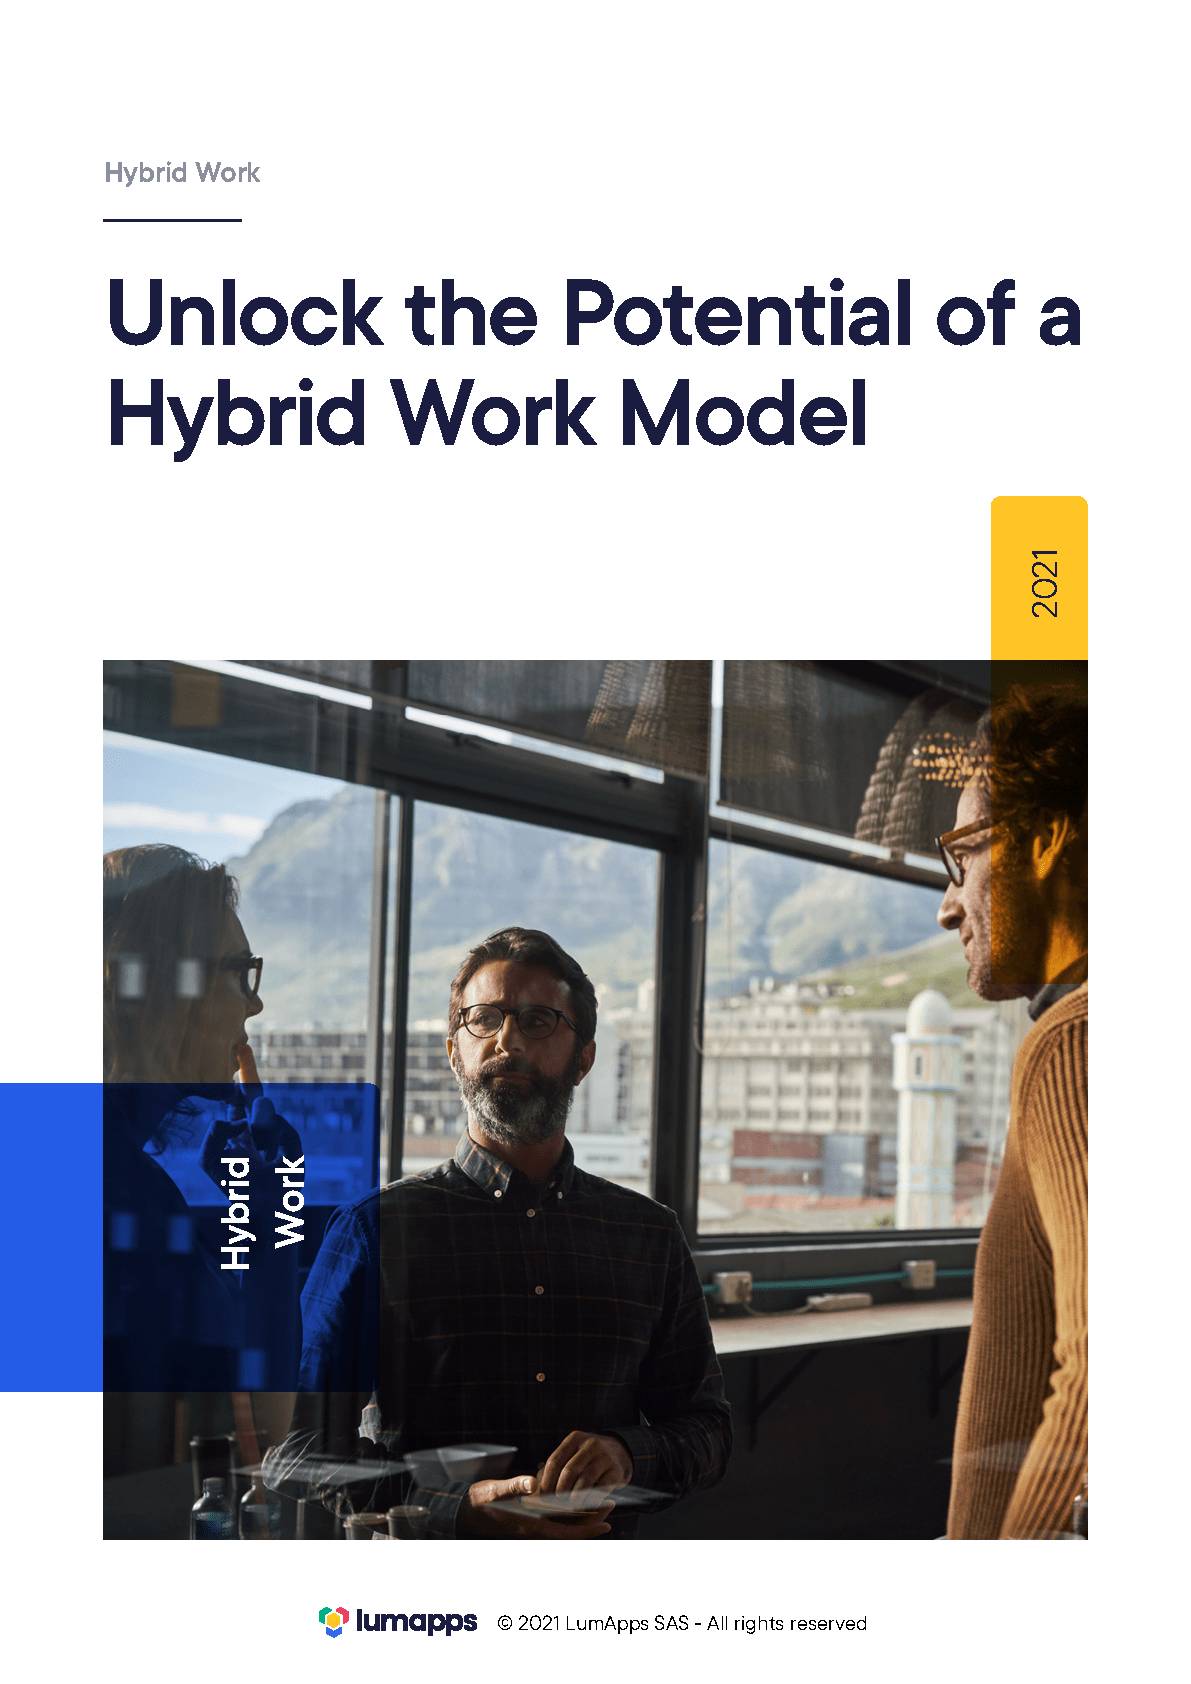 Hybrid work model discussion